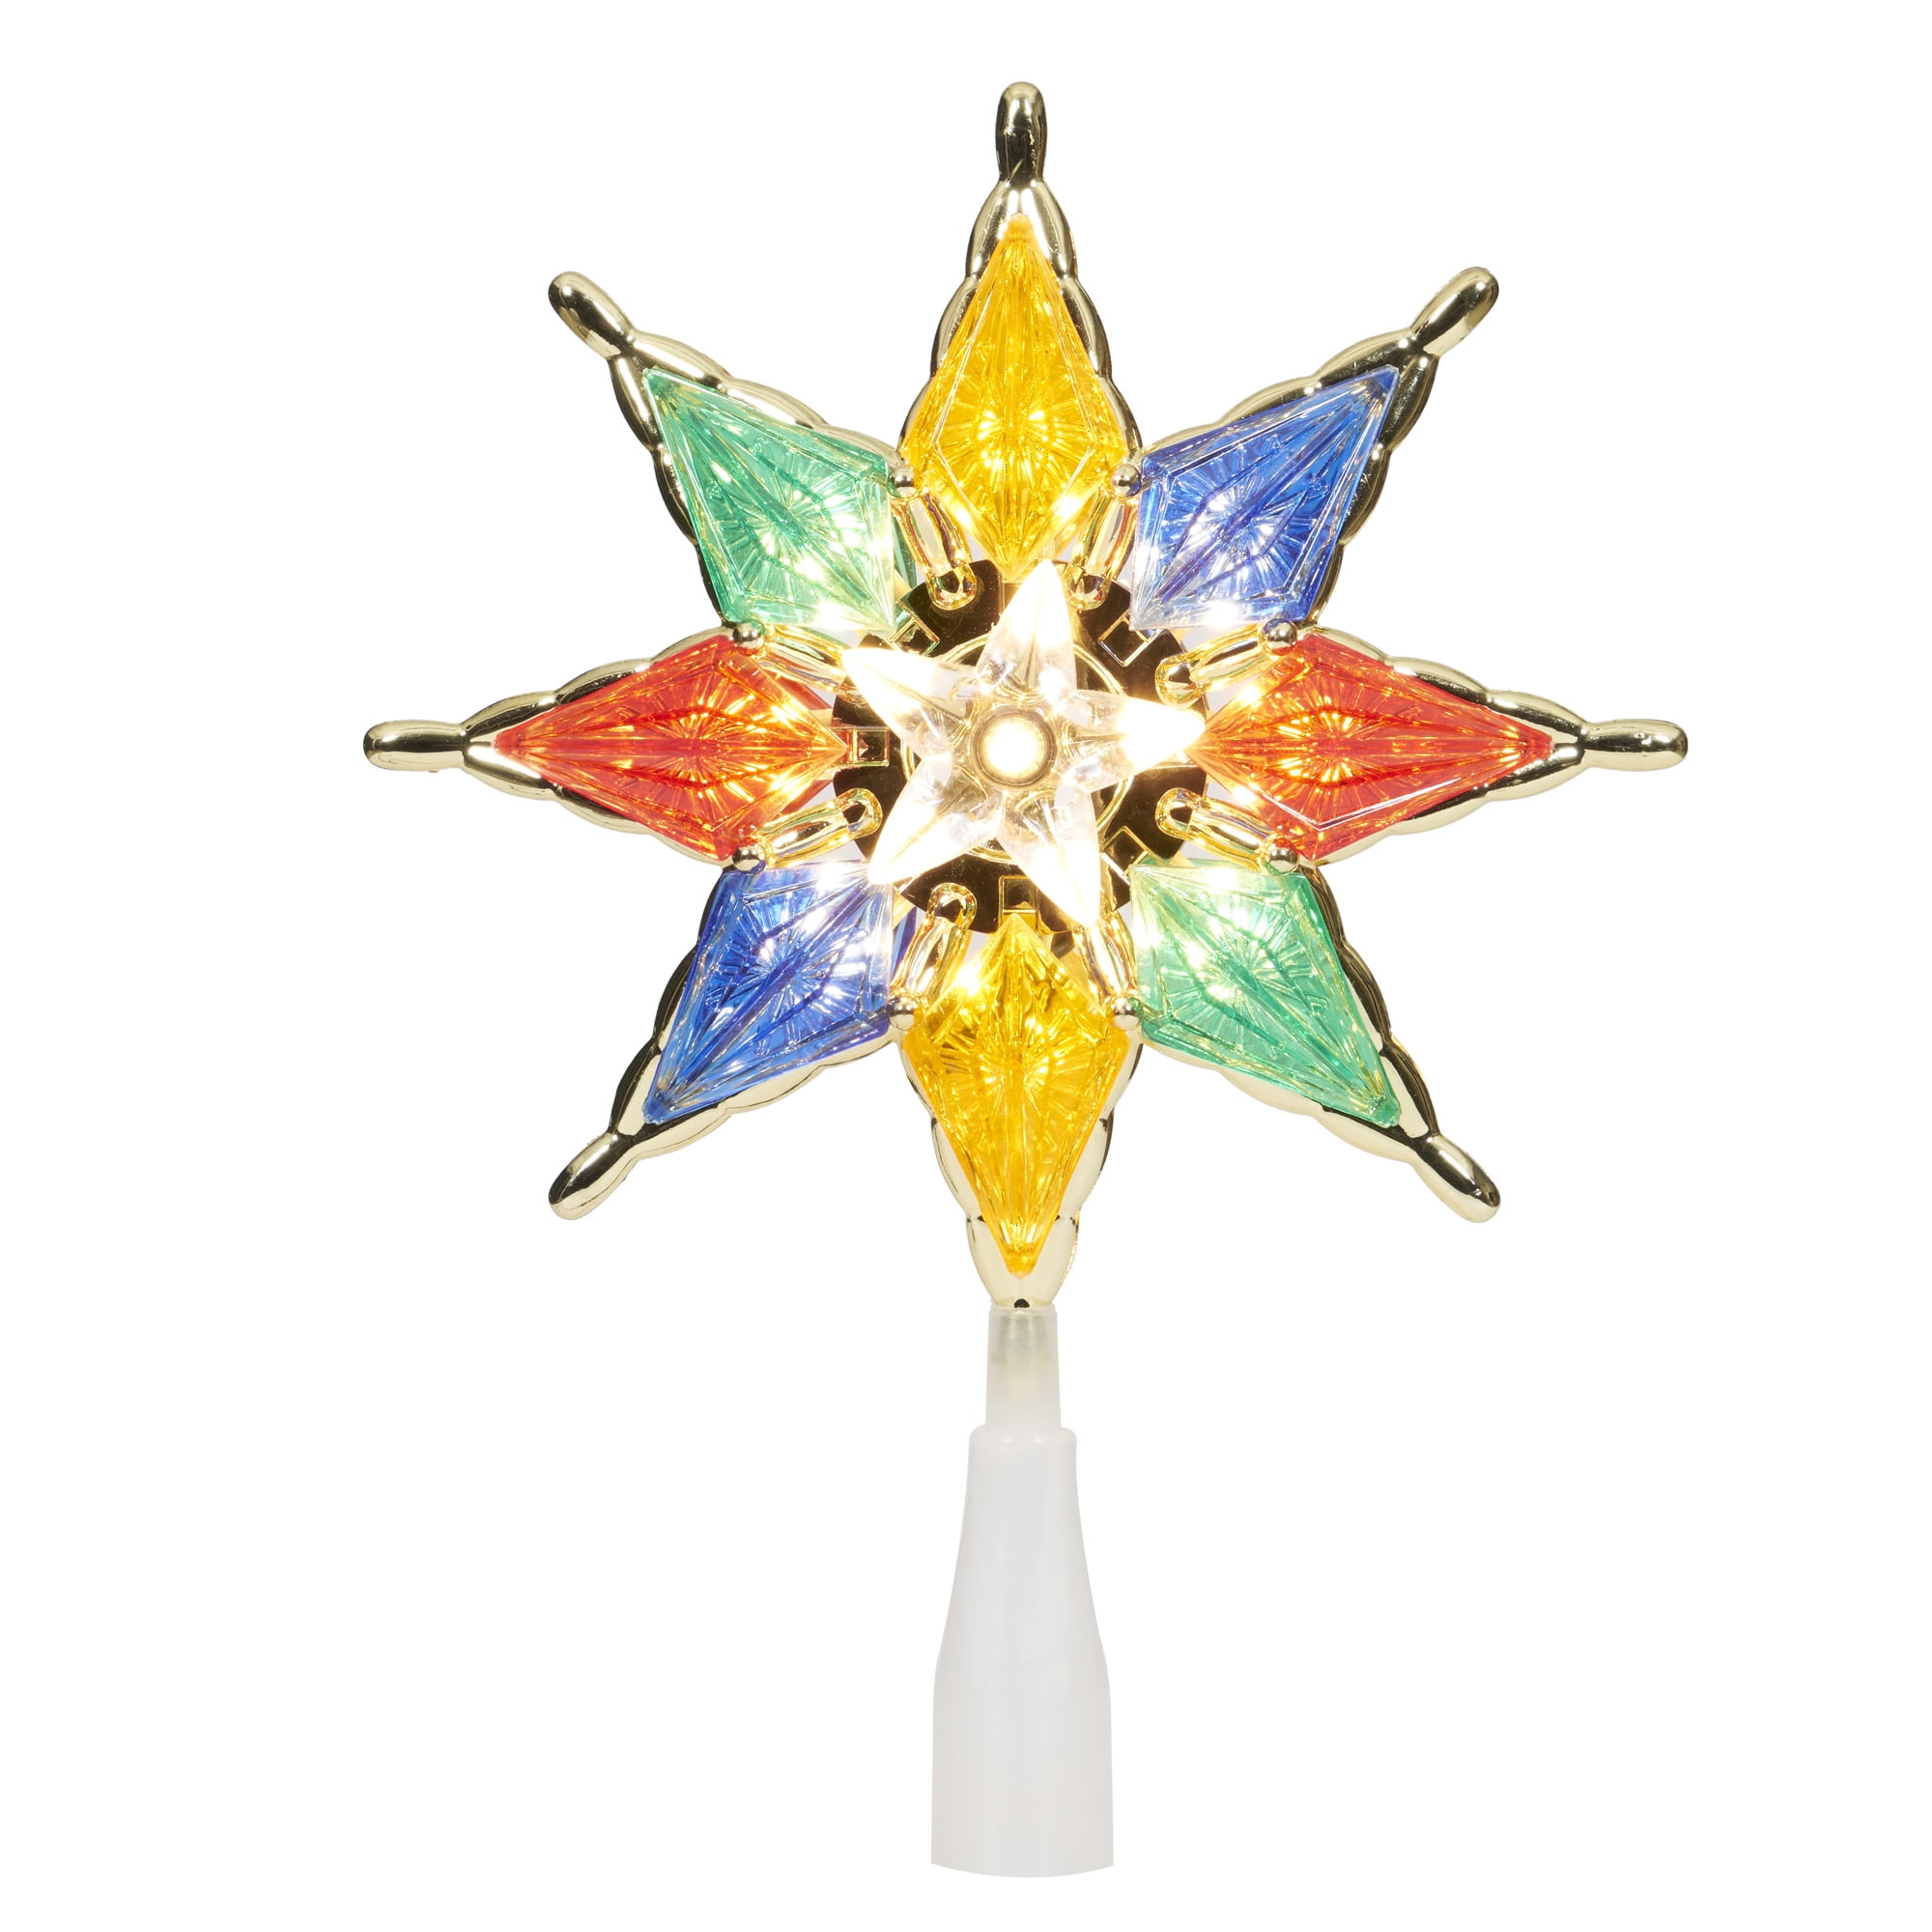 Holiday Time 8-Inch Gold-Trim Multicolor Star Christmas Tree Topper with 10 Clear Incandescent Lights